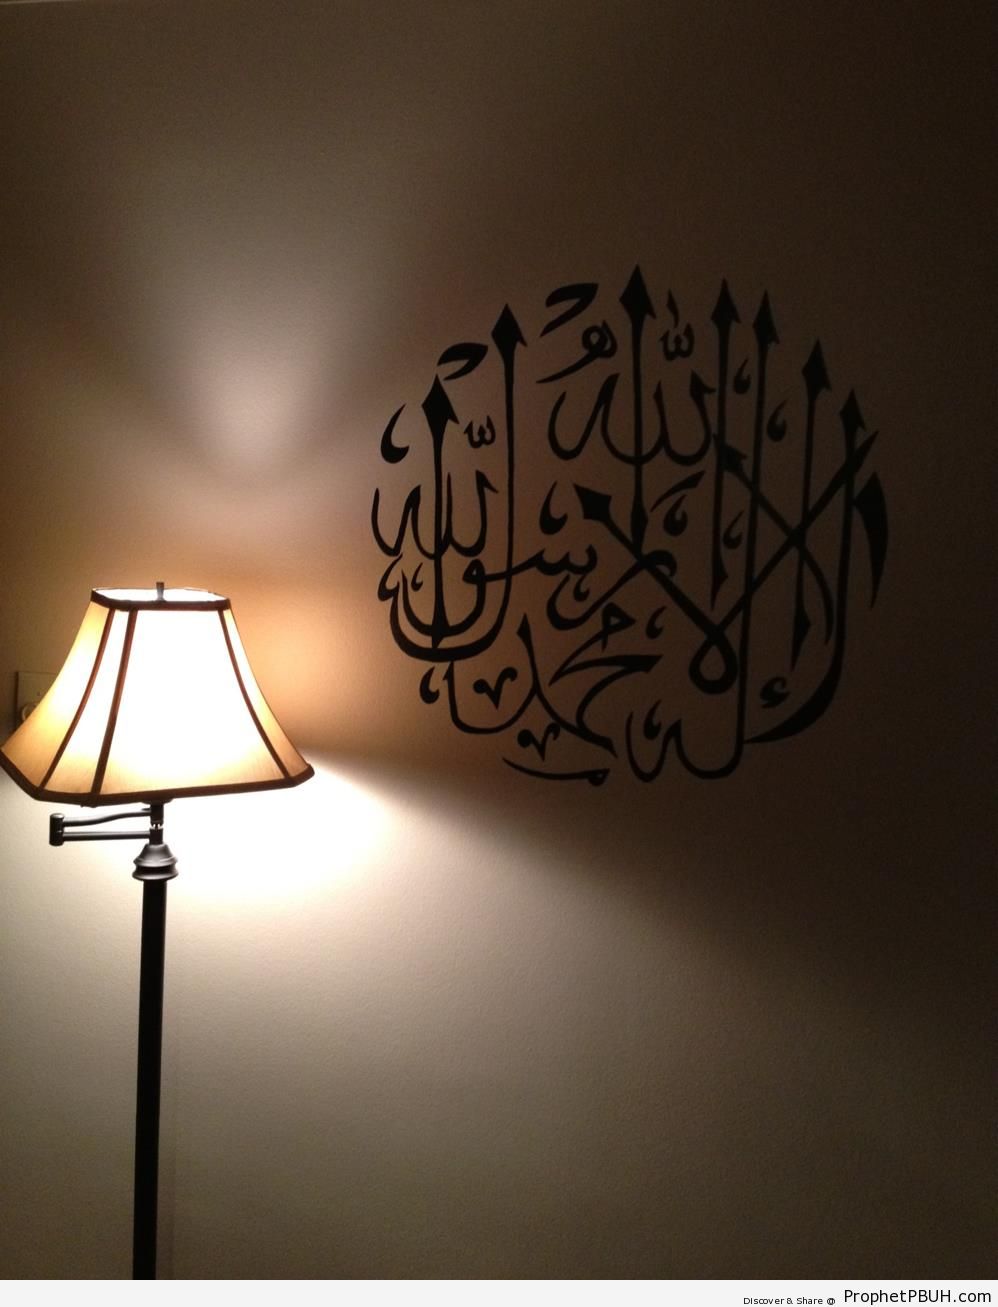 Shahadah Calligraphy Written on Wall by Lamp - Islamic Calligraphy and Typography 